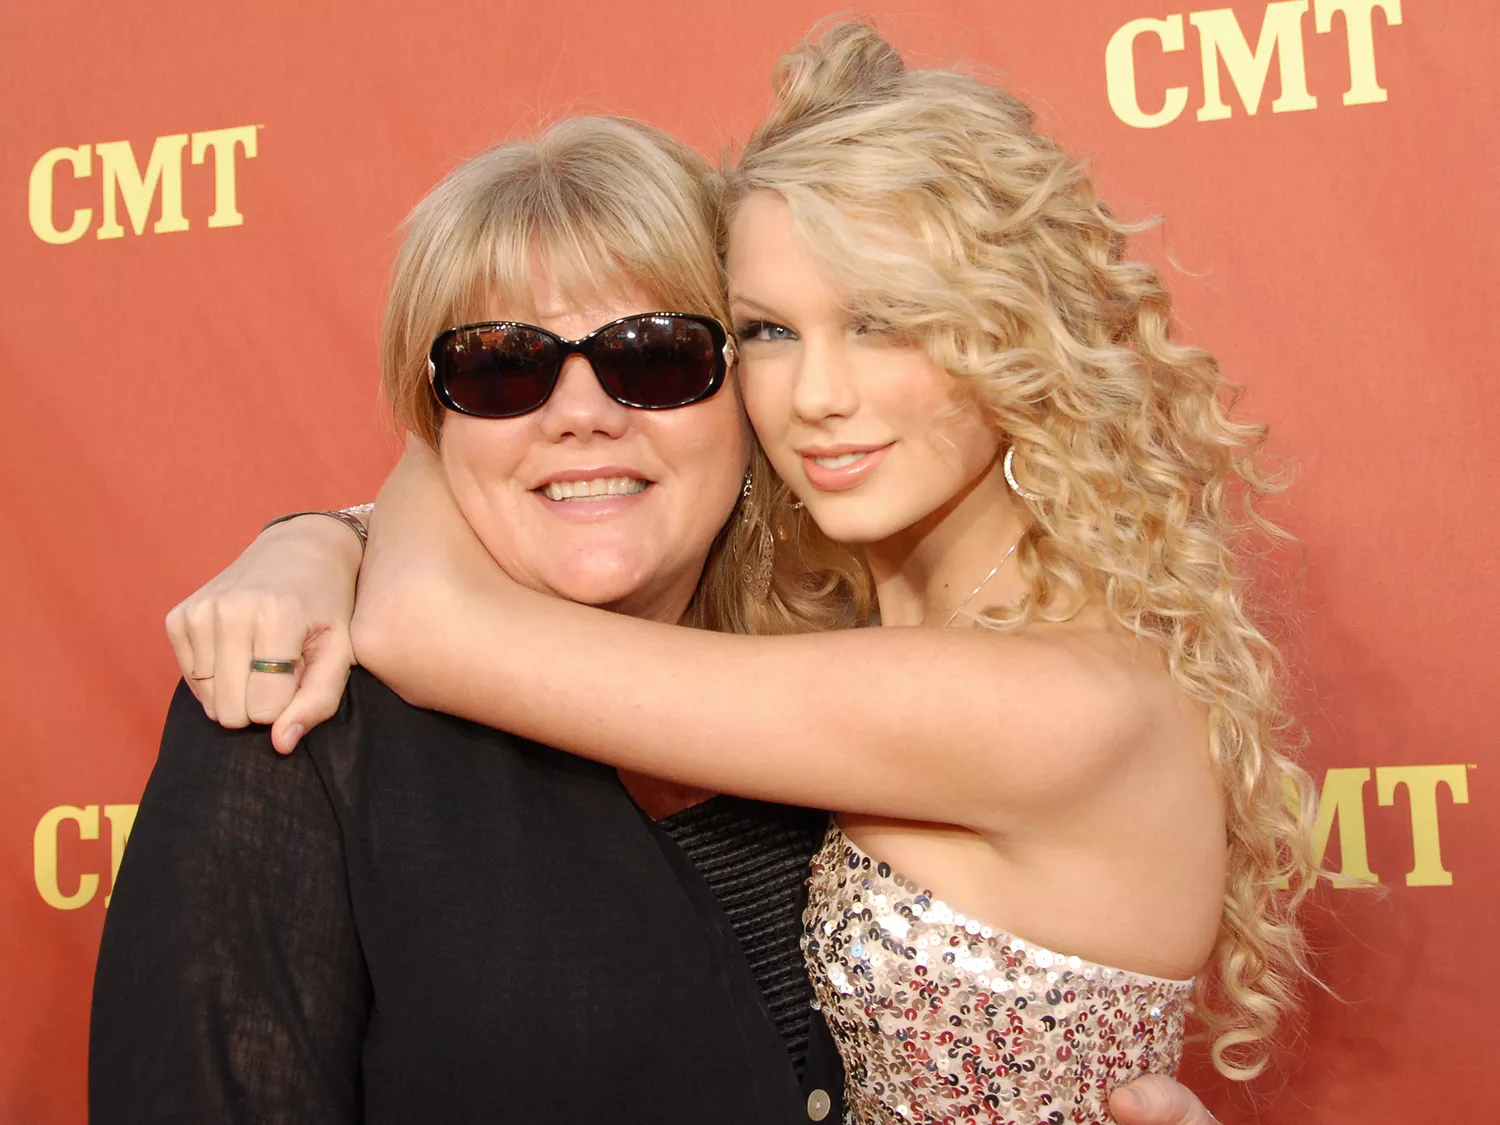 "It’s your enduring love that I think of when I’m feeling down. You always find the right words to comfort me during hard times. That’s why celebrating you on your special day is so important to me. Thank you for everything". Taylor Swift Celebrates Mom 66th Birthday Happy birthday!